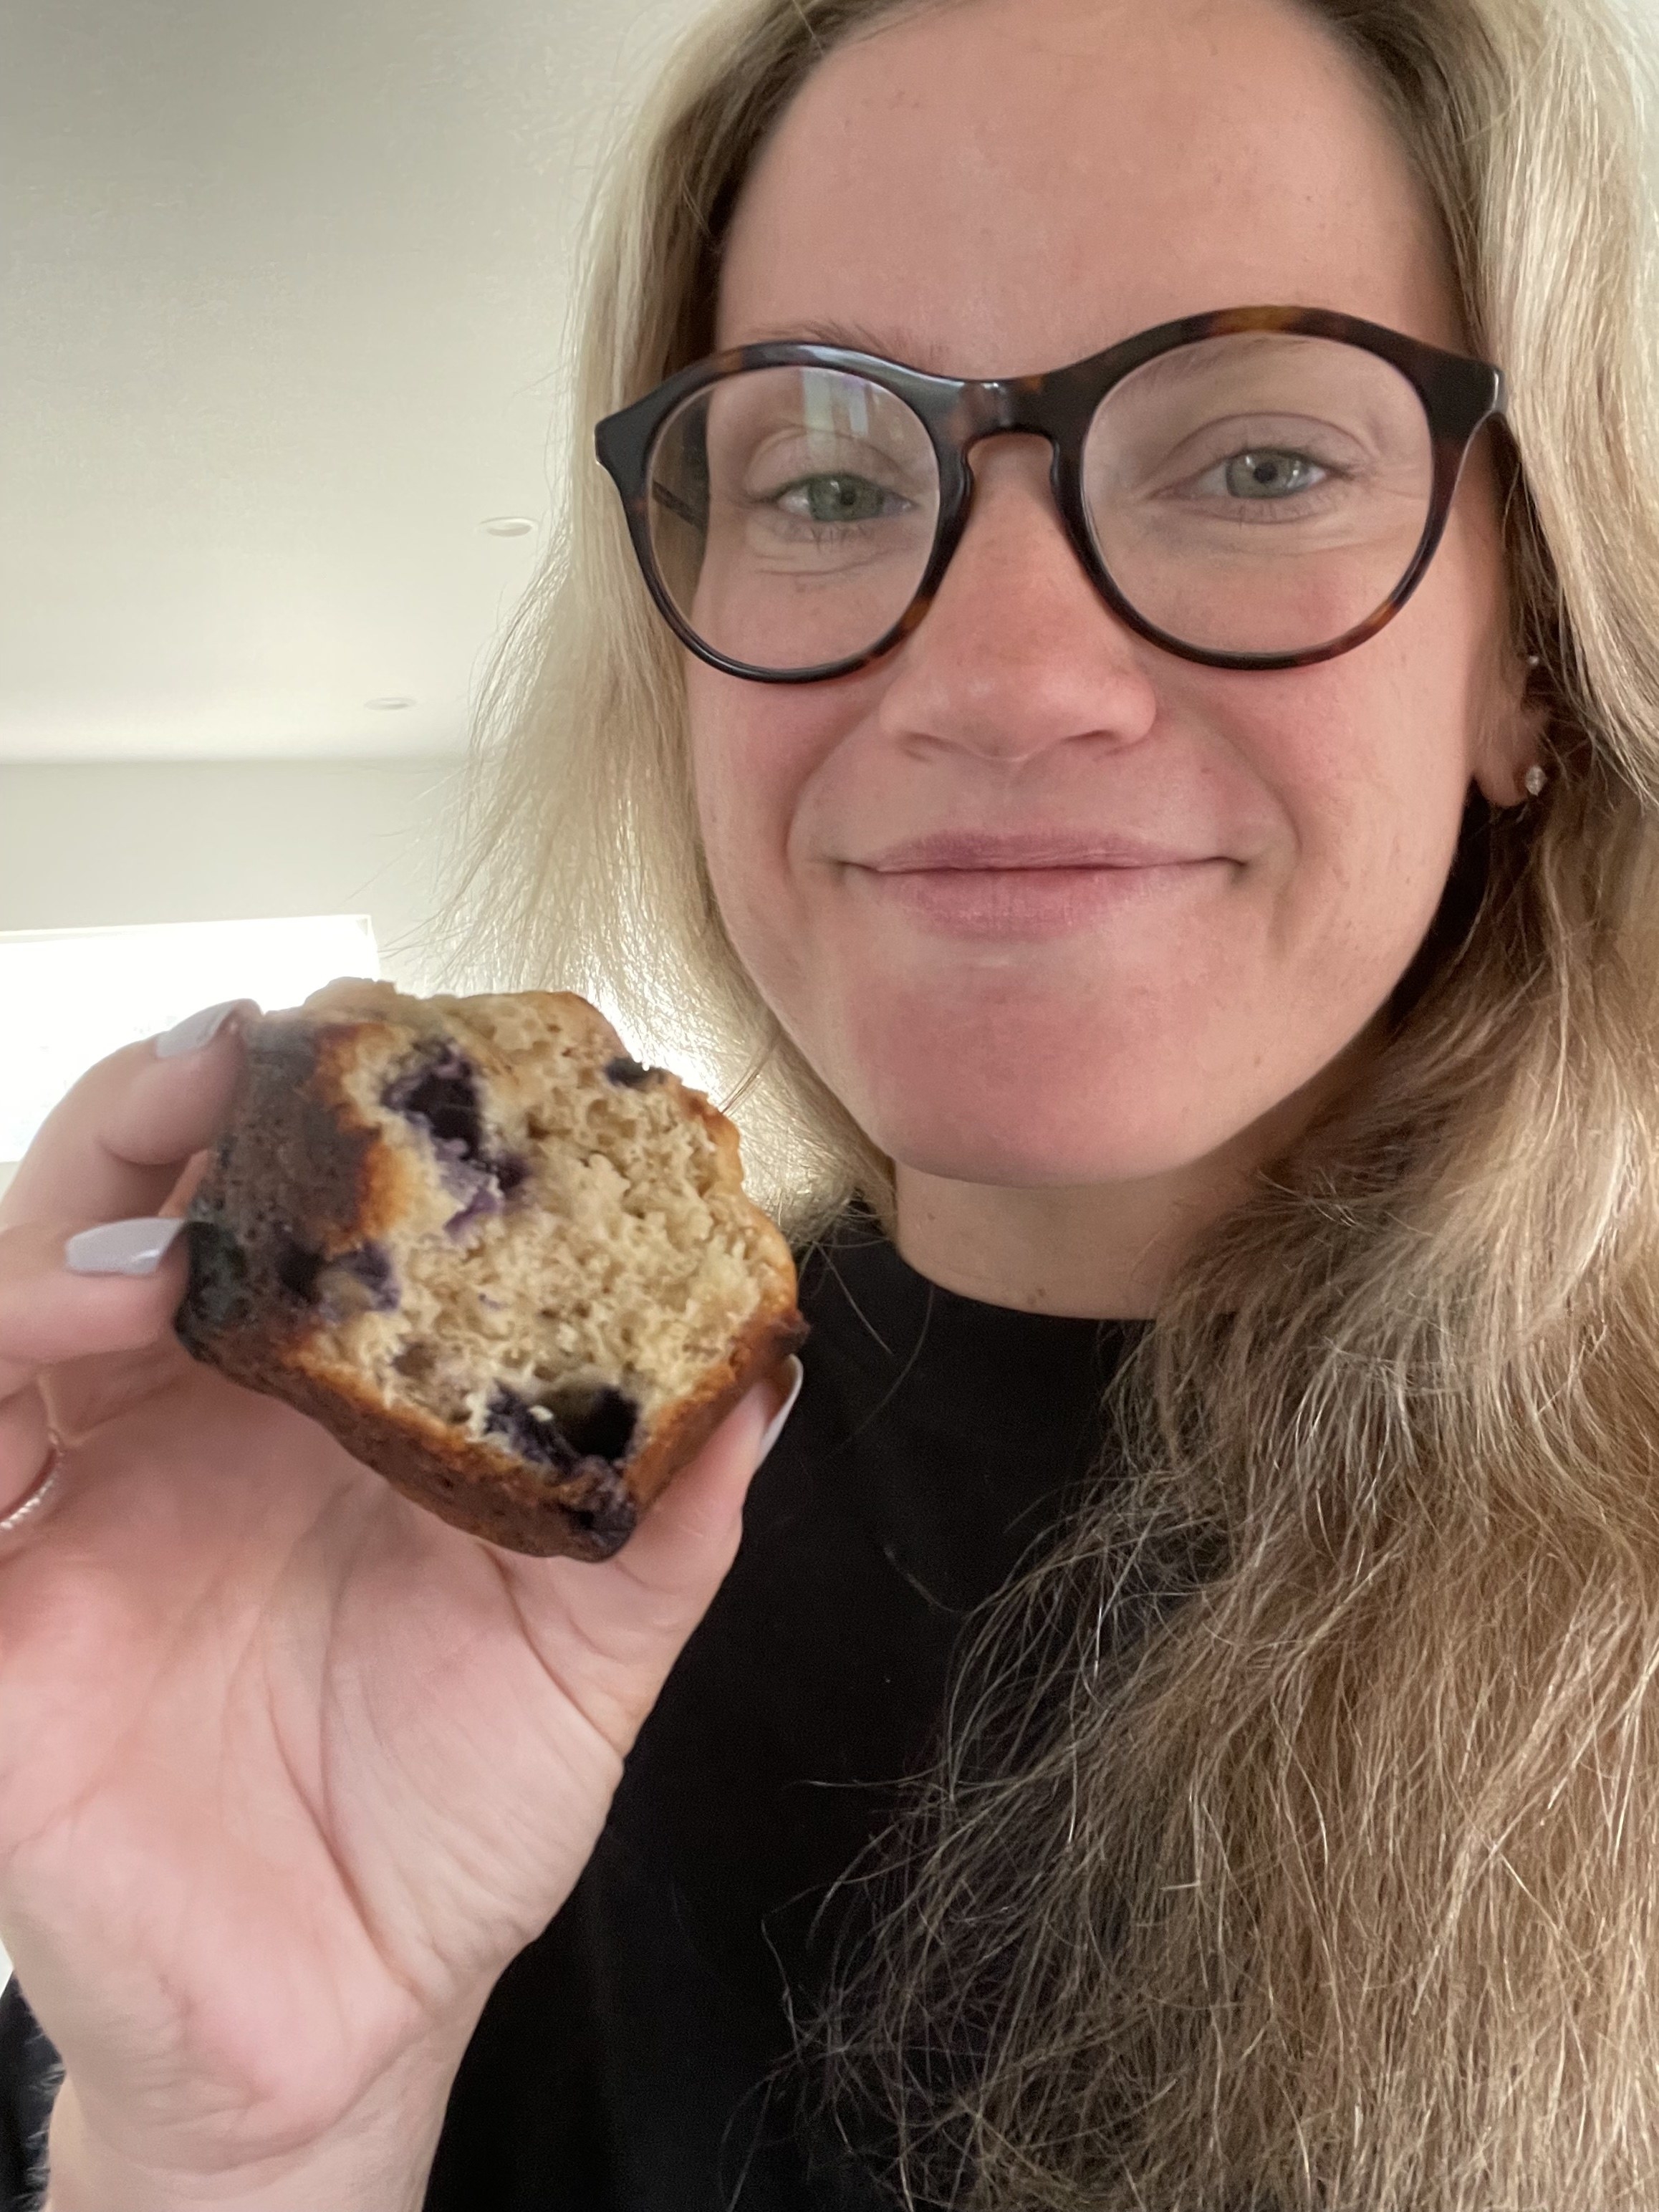 author with a muffin